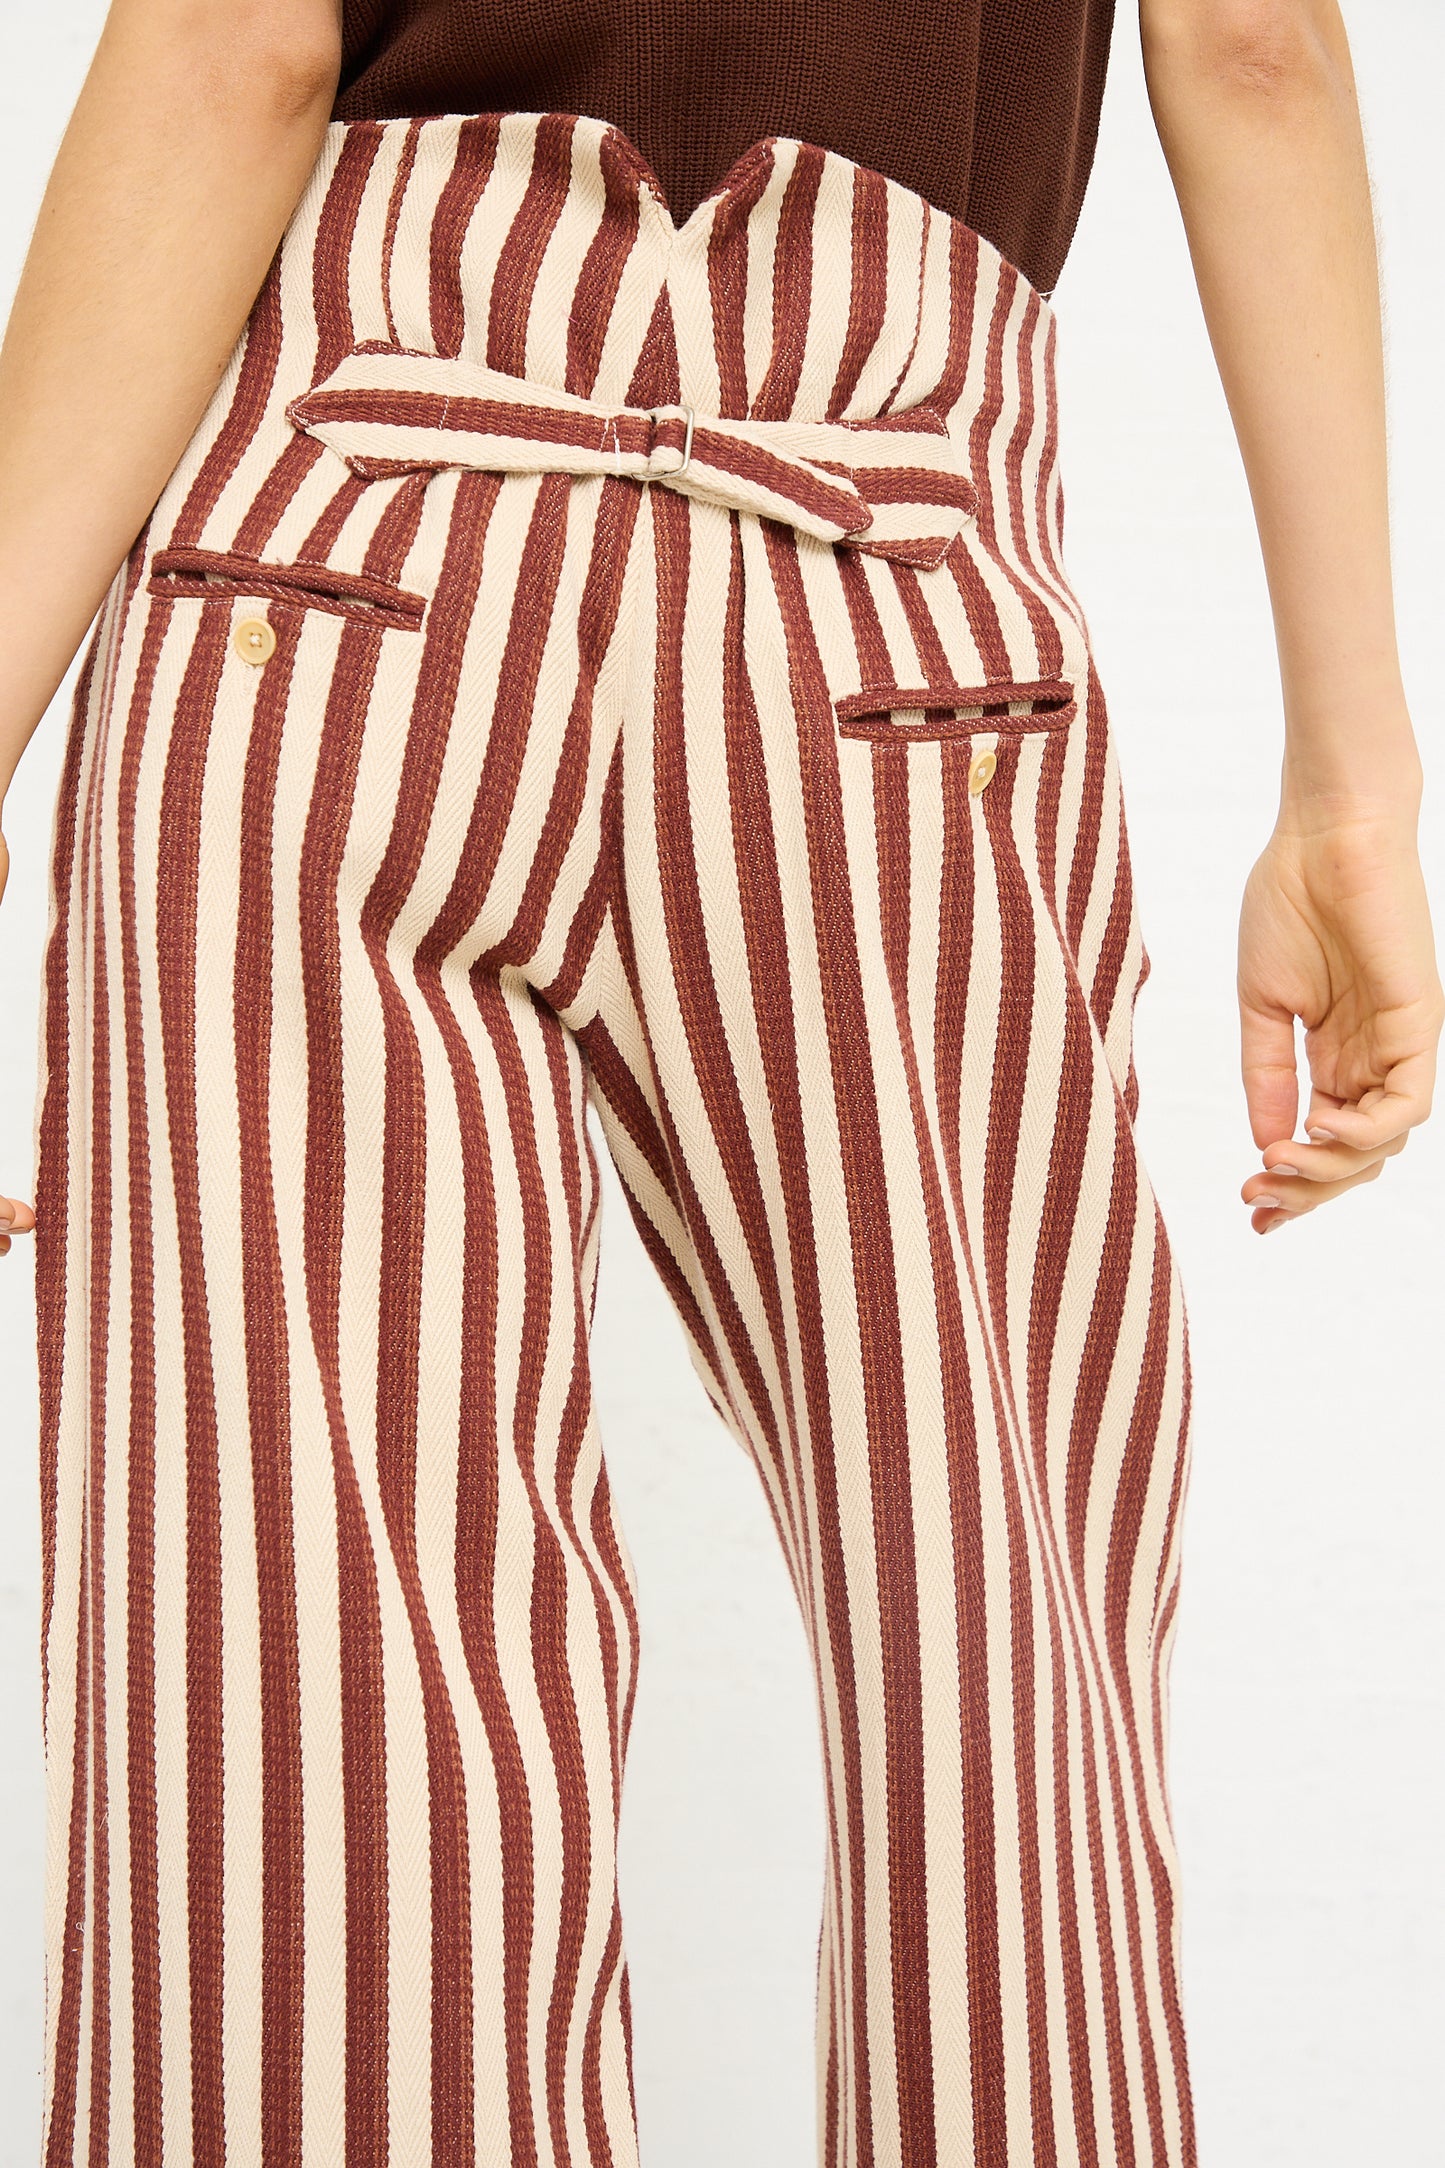 Close-up of a person wearing Caron Callahan's Dexter Pant in Auburn Stripe with a brown belt, emphasizing the high waist and side pockets.